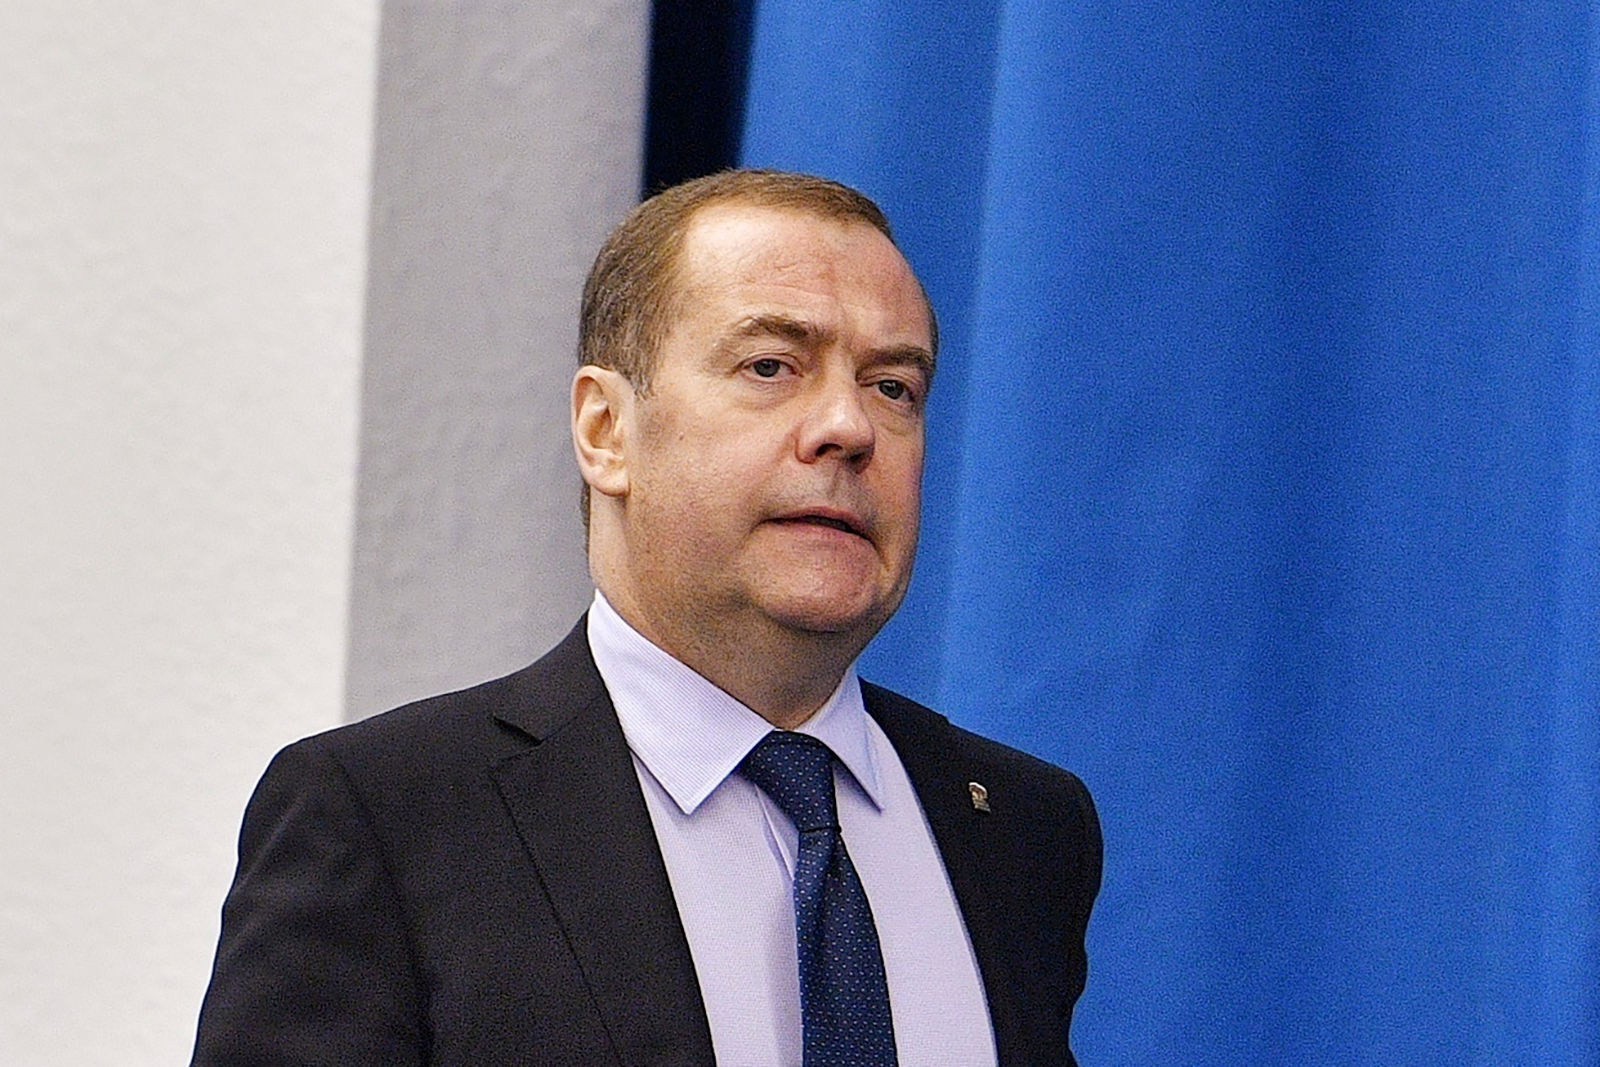 Dmitry Medvedev attends a meeting in Moscow on July 18.